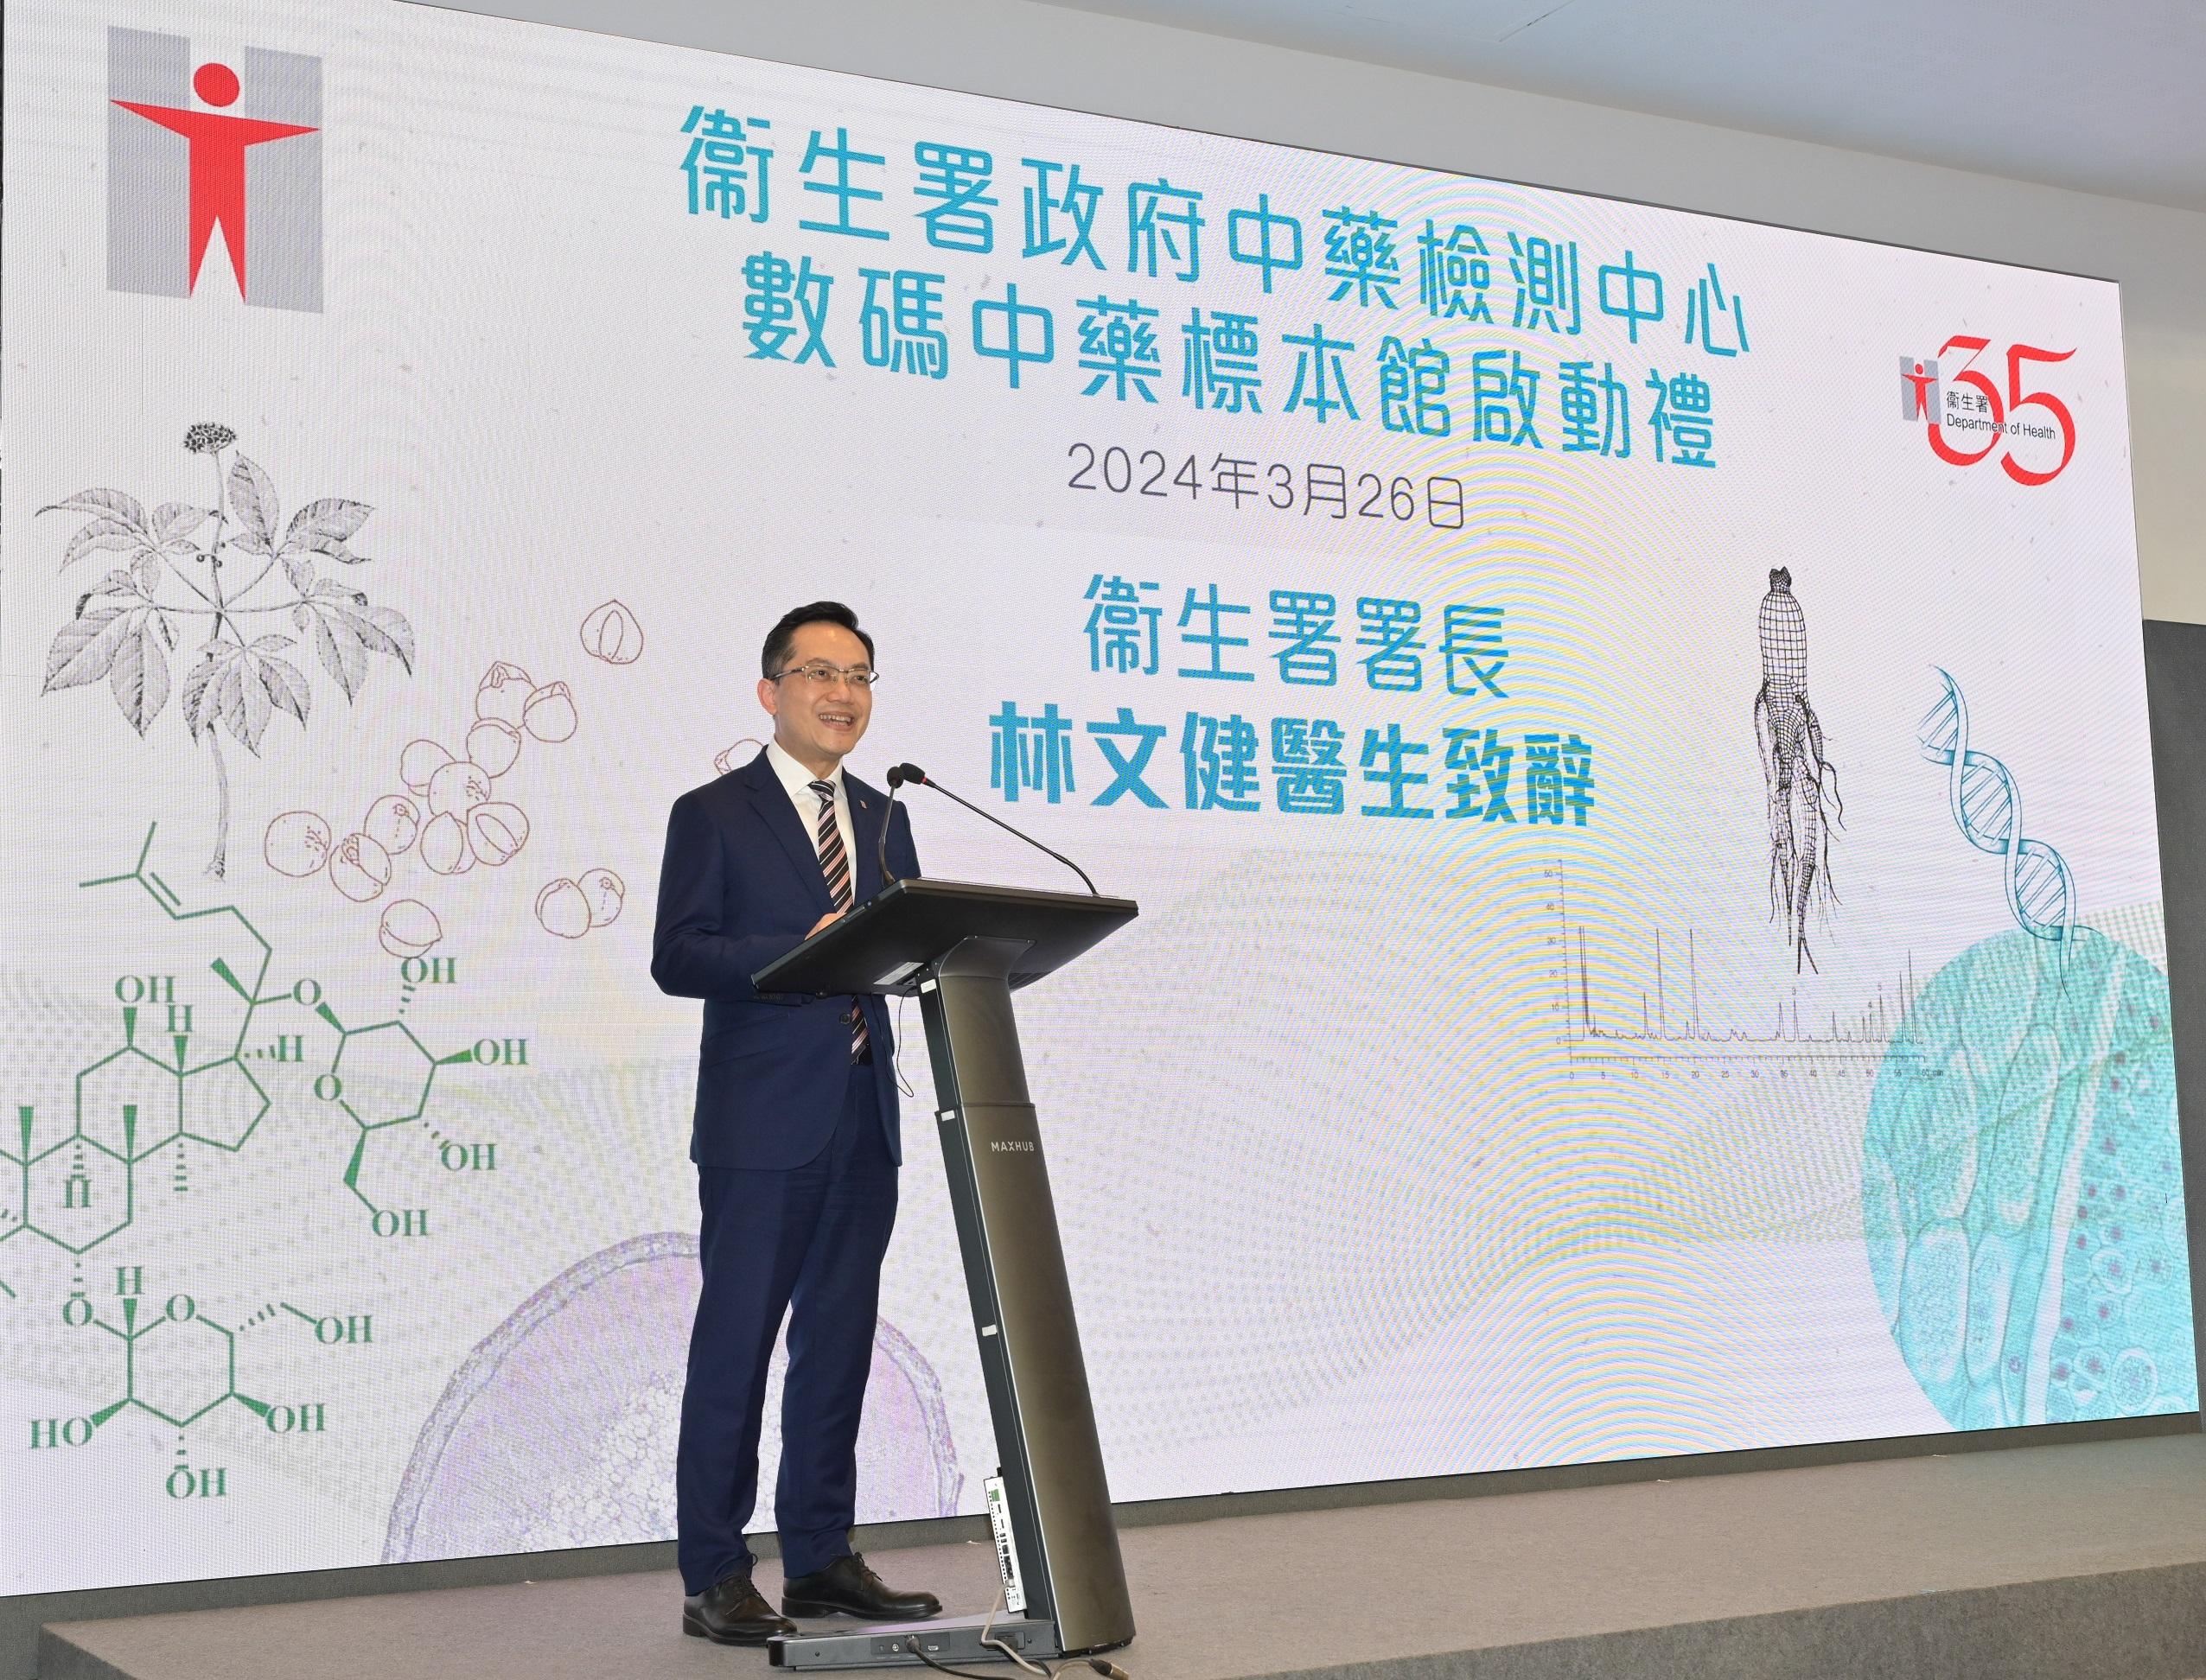 The Secretary for Health, Professor Lo Chung-mau, today (March 26) attended the launch ceremony of the Department of Health's new dedicated website Digital Herbarium for Chinese Medicines. Photo shows the Director of Health, Dr Ronald Lam, delivering a speech at the launching ceremony.